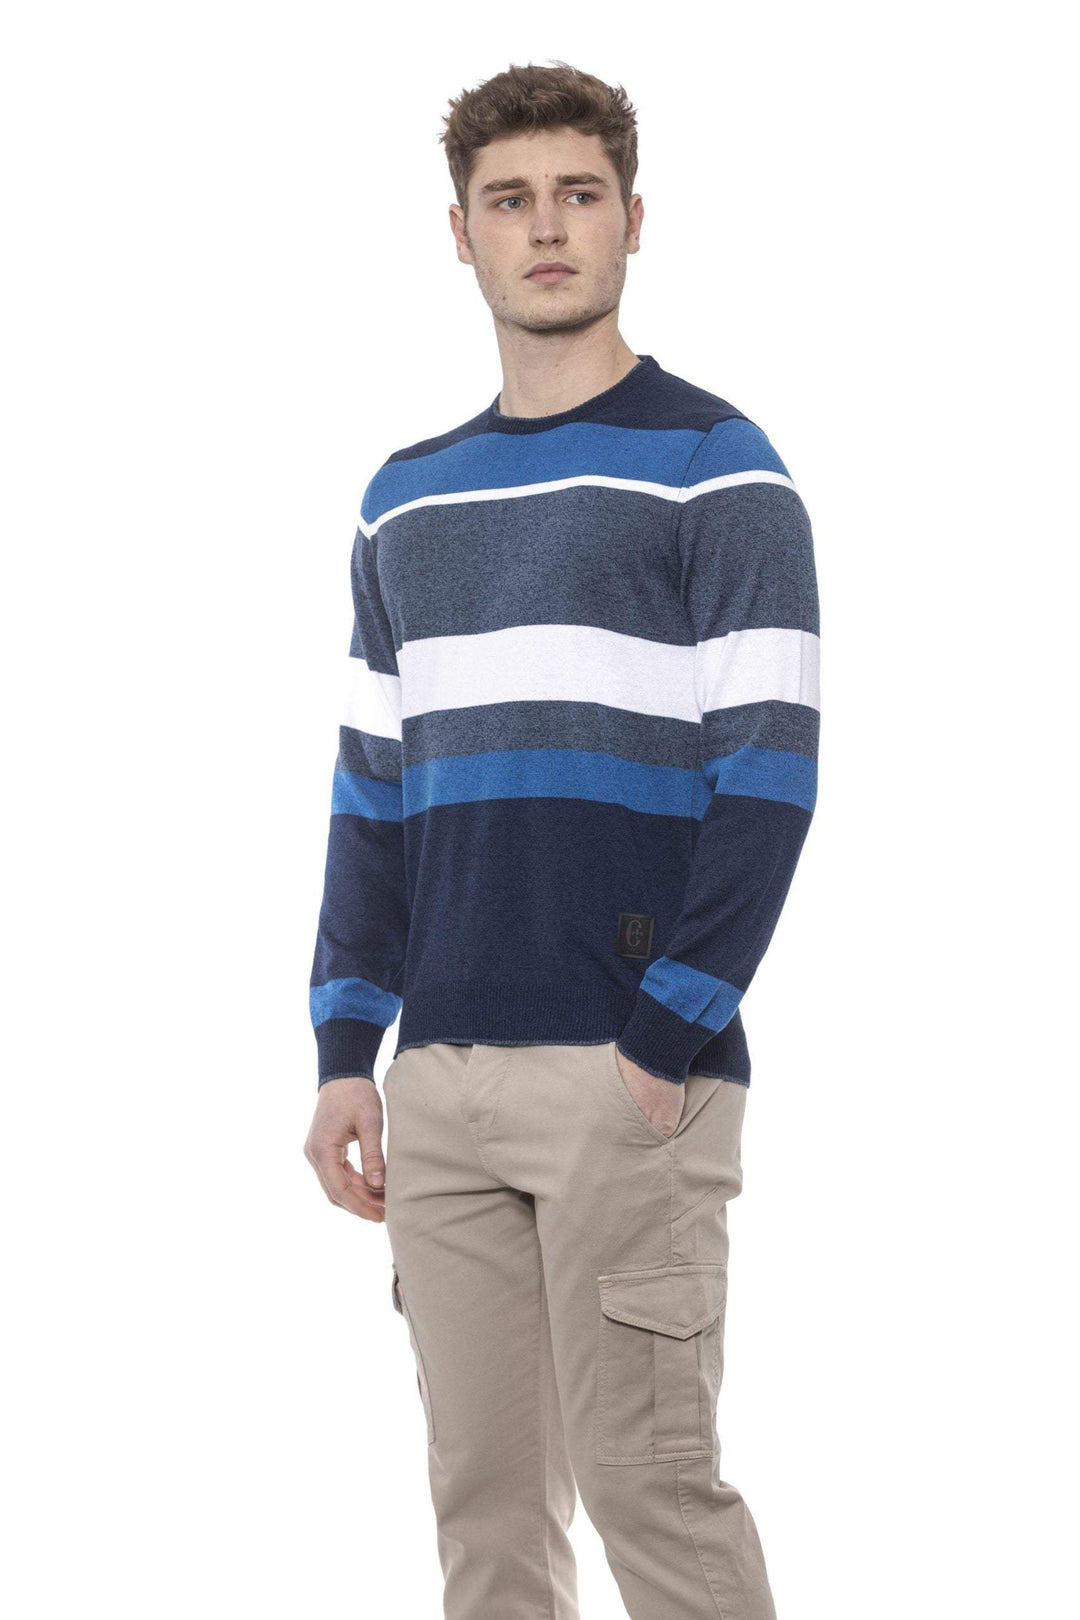 Conte of Florence crew neck  solid color  Sweater #men, Blue, Conte of Florence, feed-agegroup-adult, feed-color-Blue, feed-gender-male, L, M, S, Sweaters - Men - Clothing, XL at SEYMAYKA